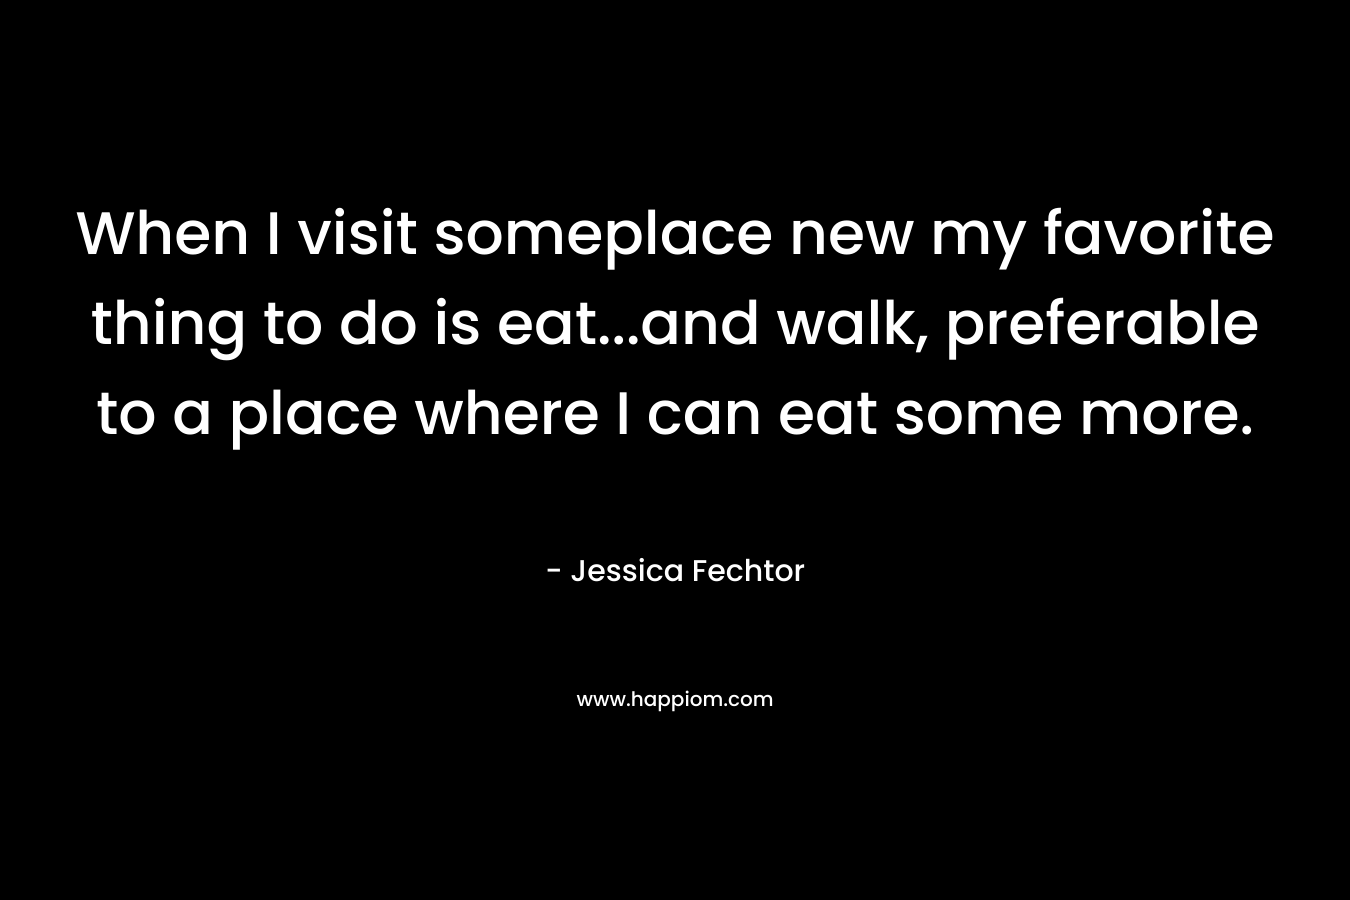 When I visit someplace new my favorite thing to do is eat…and walk, preferable to a place where I can eat some more. – Jessica Fechtor